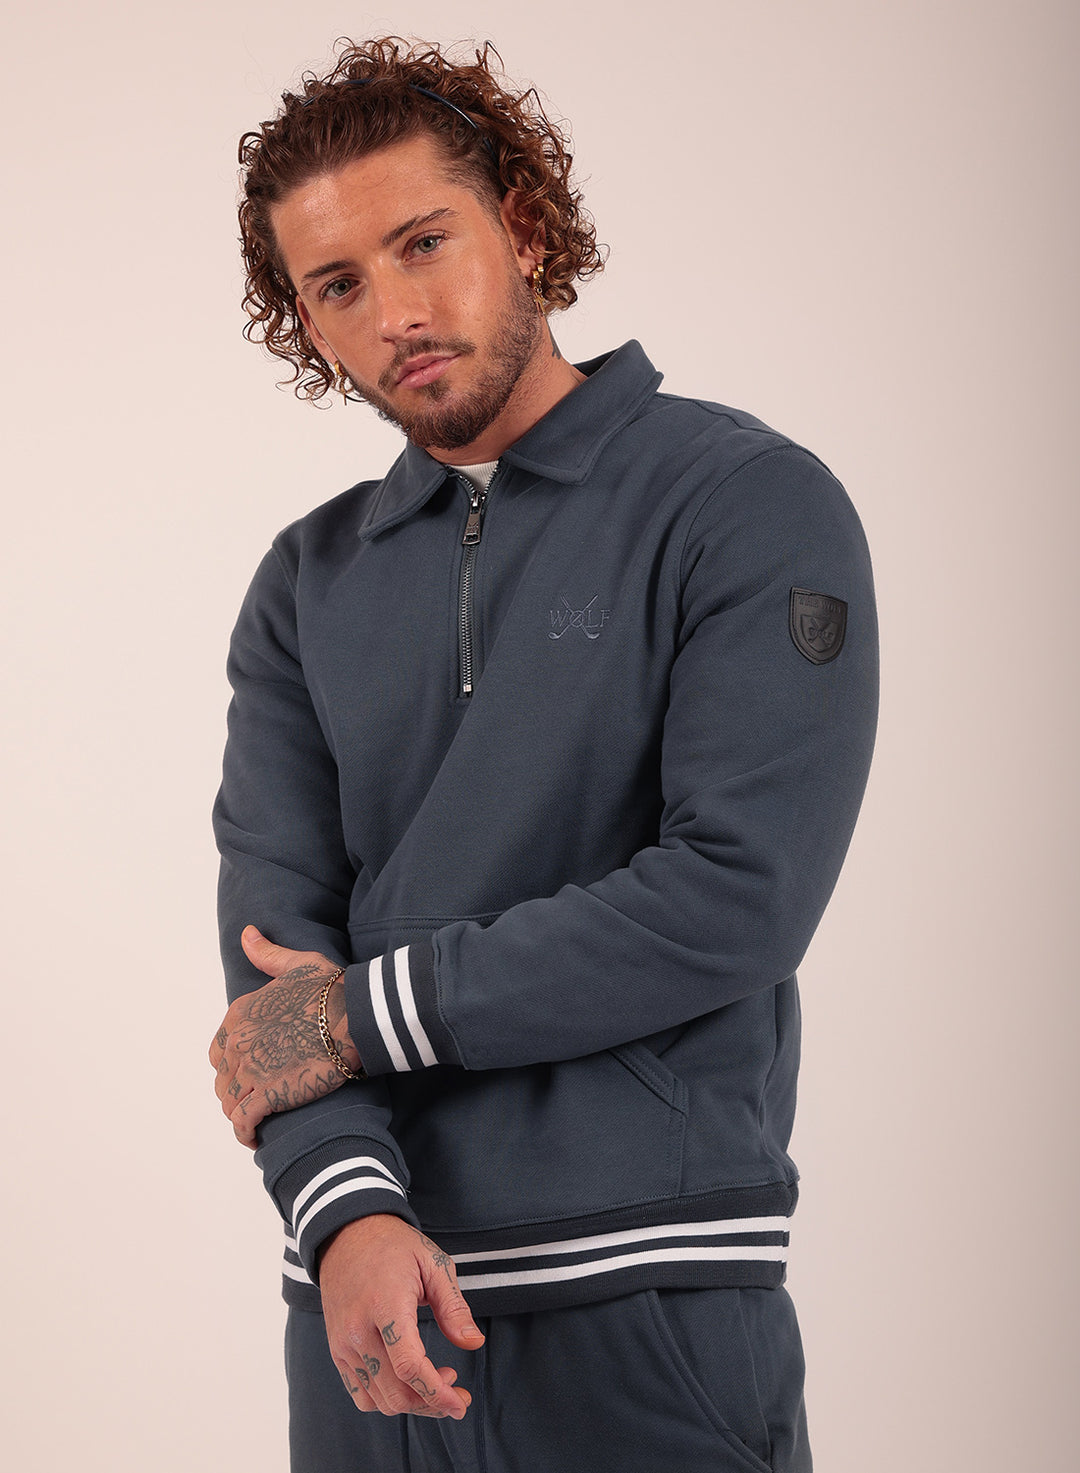 Signature Tracksuit Set in Charcoal Grey